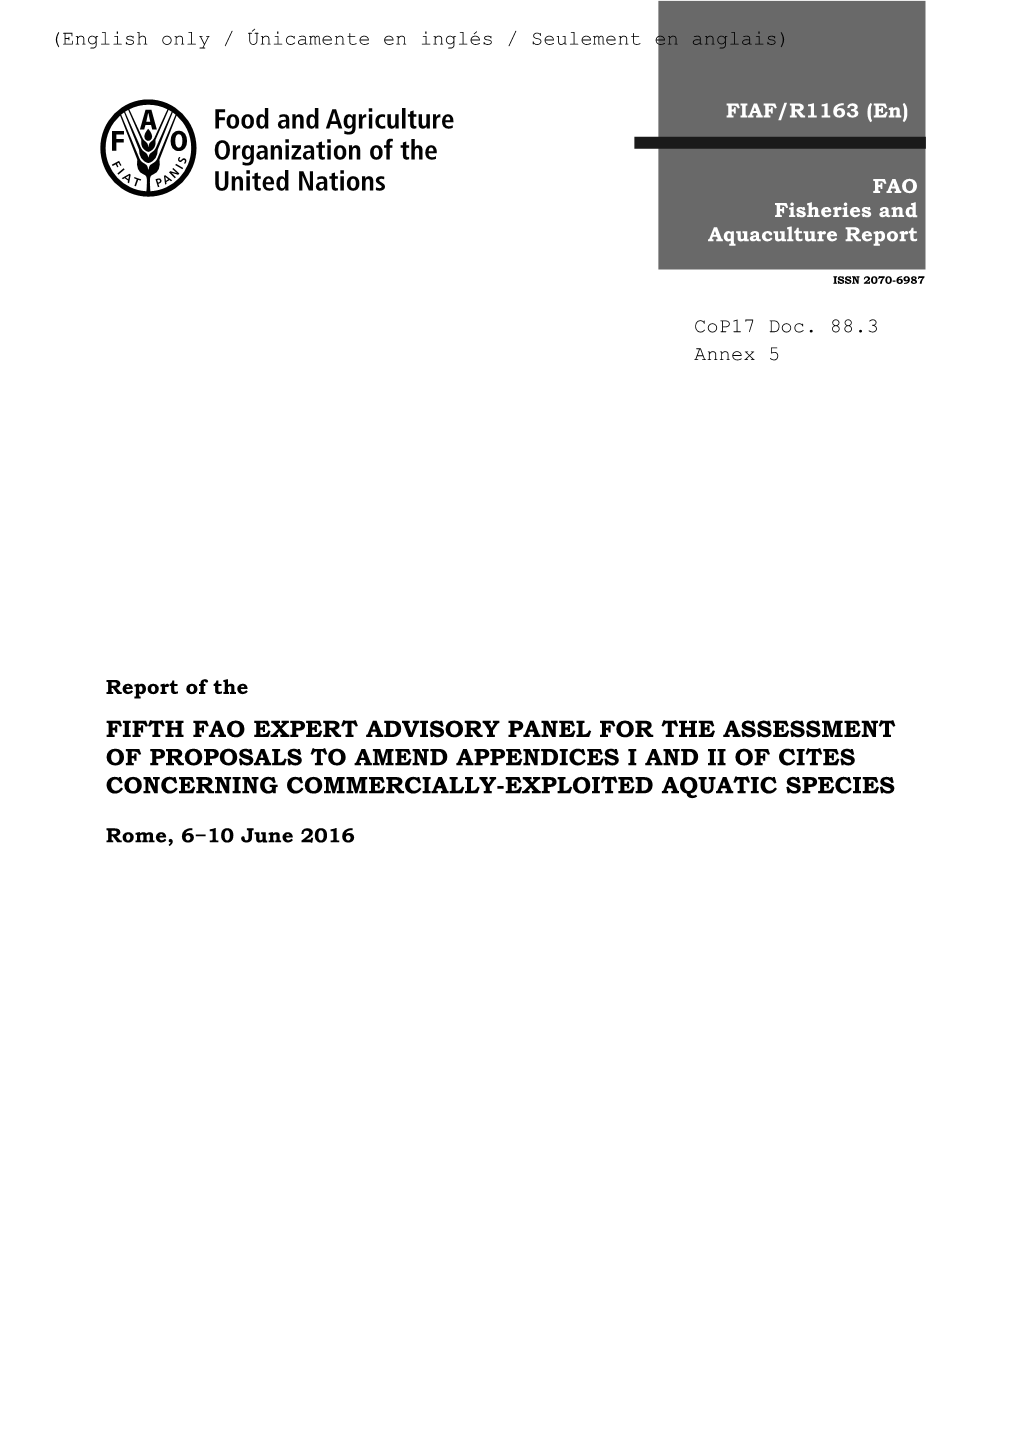 Report of the FIFTH FAO EXPERT ADVISORY PANEL for the ASSESSMENT of PROPOSALS to AMEND APPENDICES I and II of CITES CONCERNING COMMERCIALLY-EXPLOITED AQUATIC SPECIES